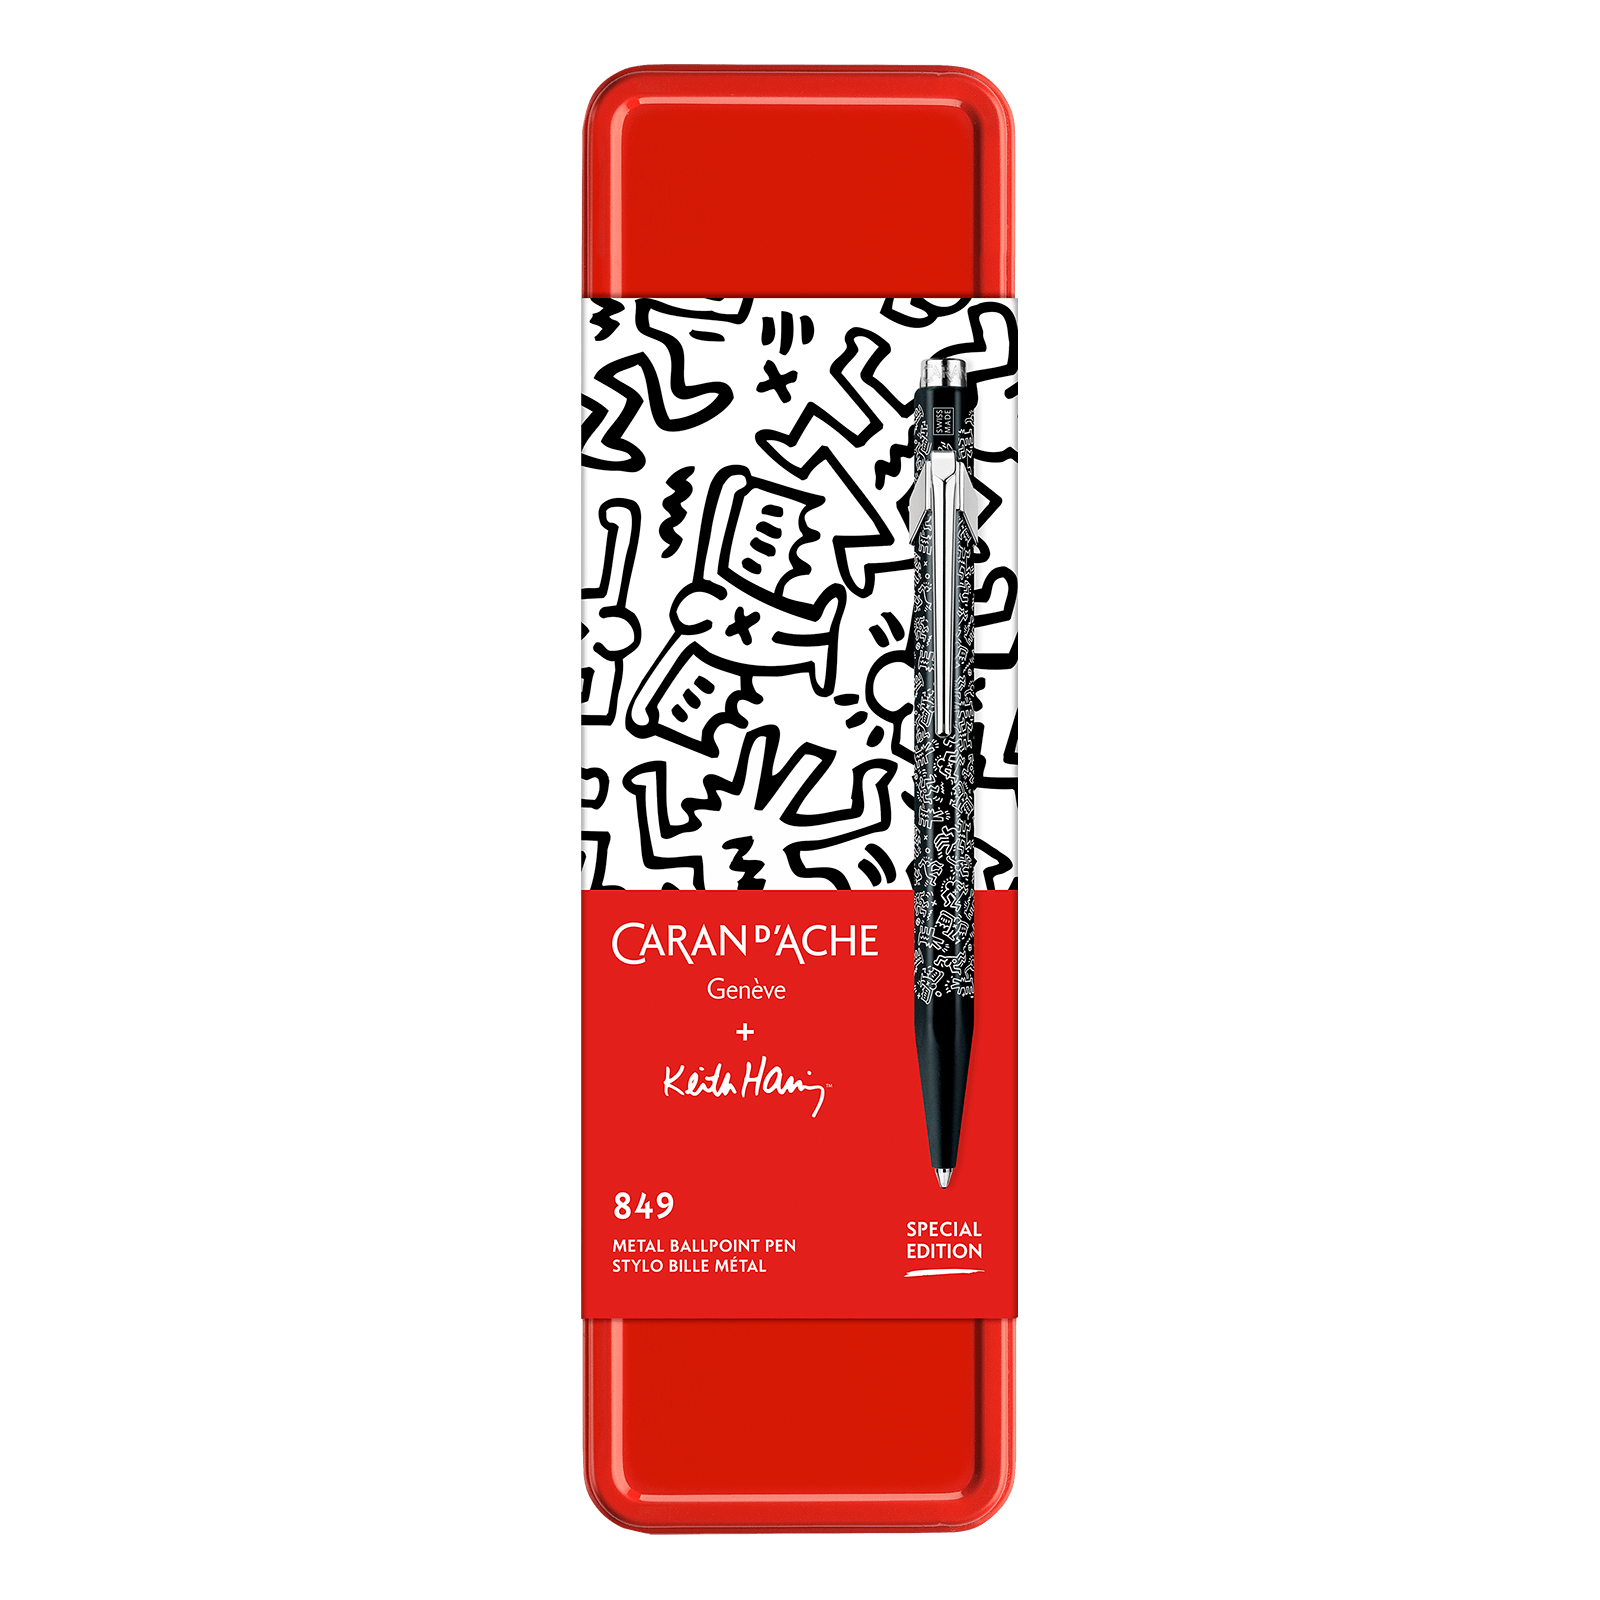 Caran D'Ache + Keith Haring 849 Special Edition Black Ballpoint - Pencraft the boutique